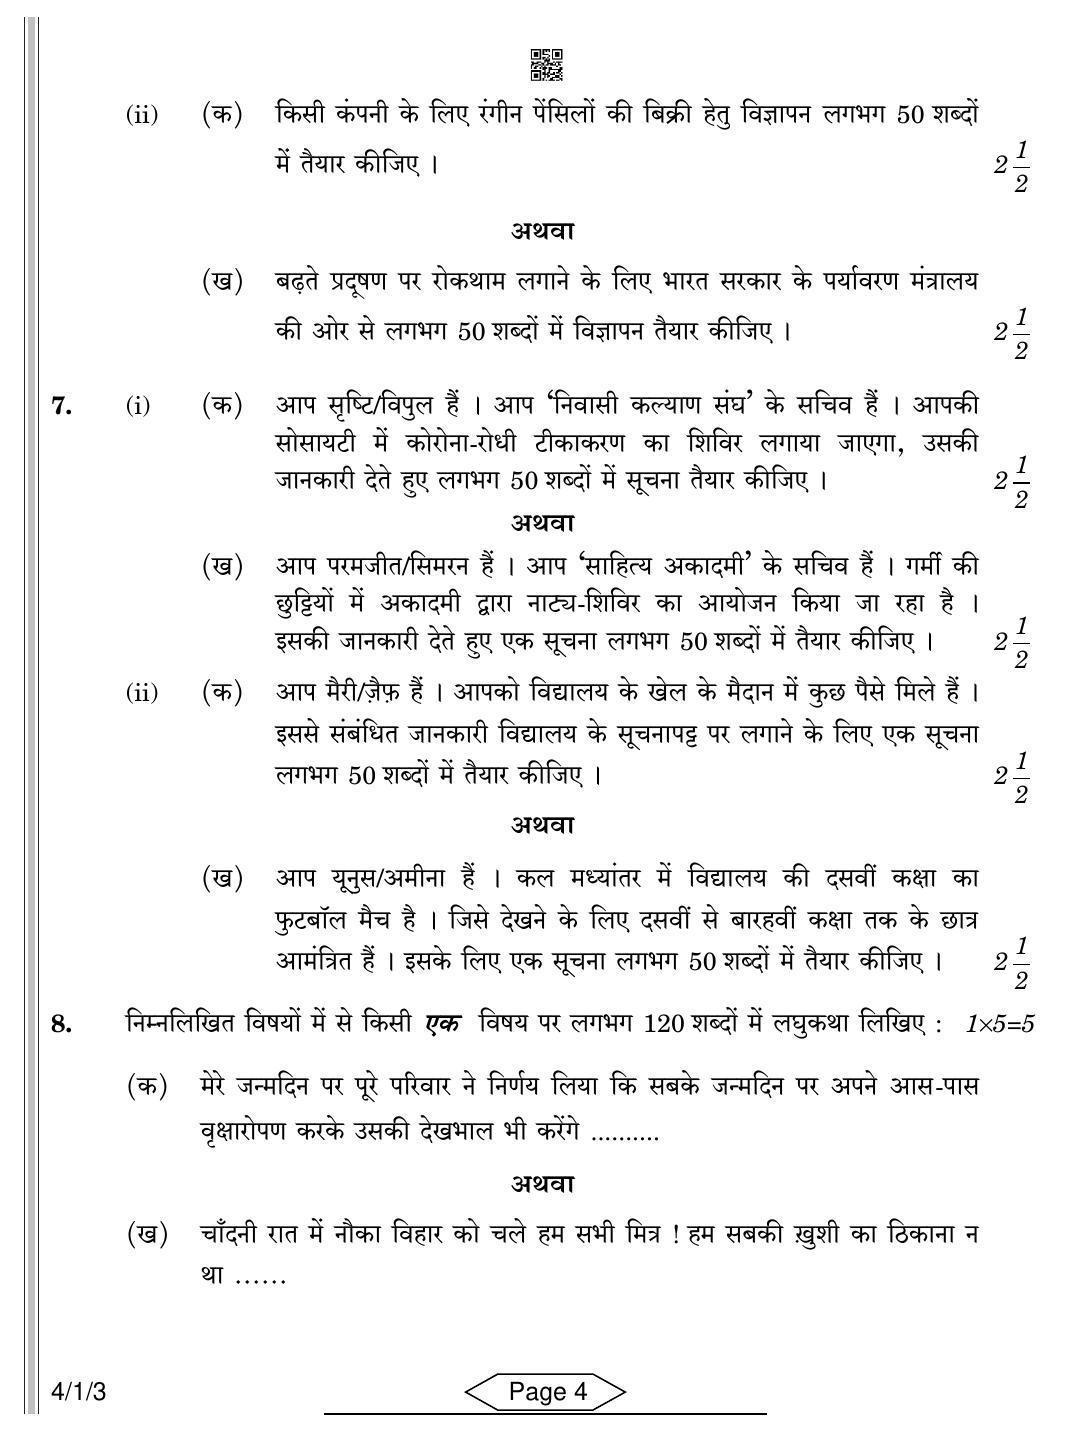 CBSE Class 10 4-1-3 Hindi B 2022 Question Paper - Page 4